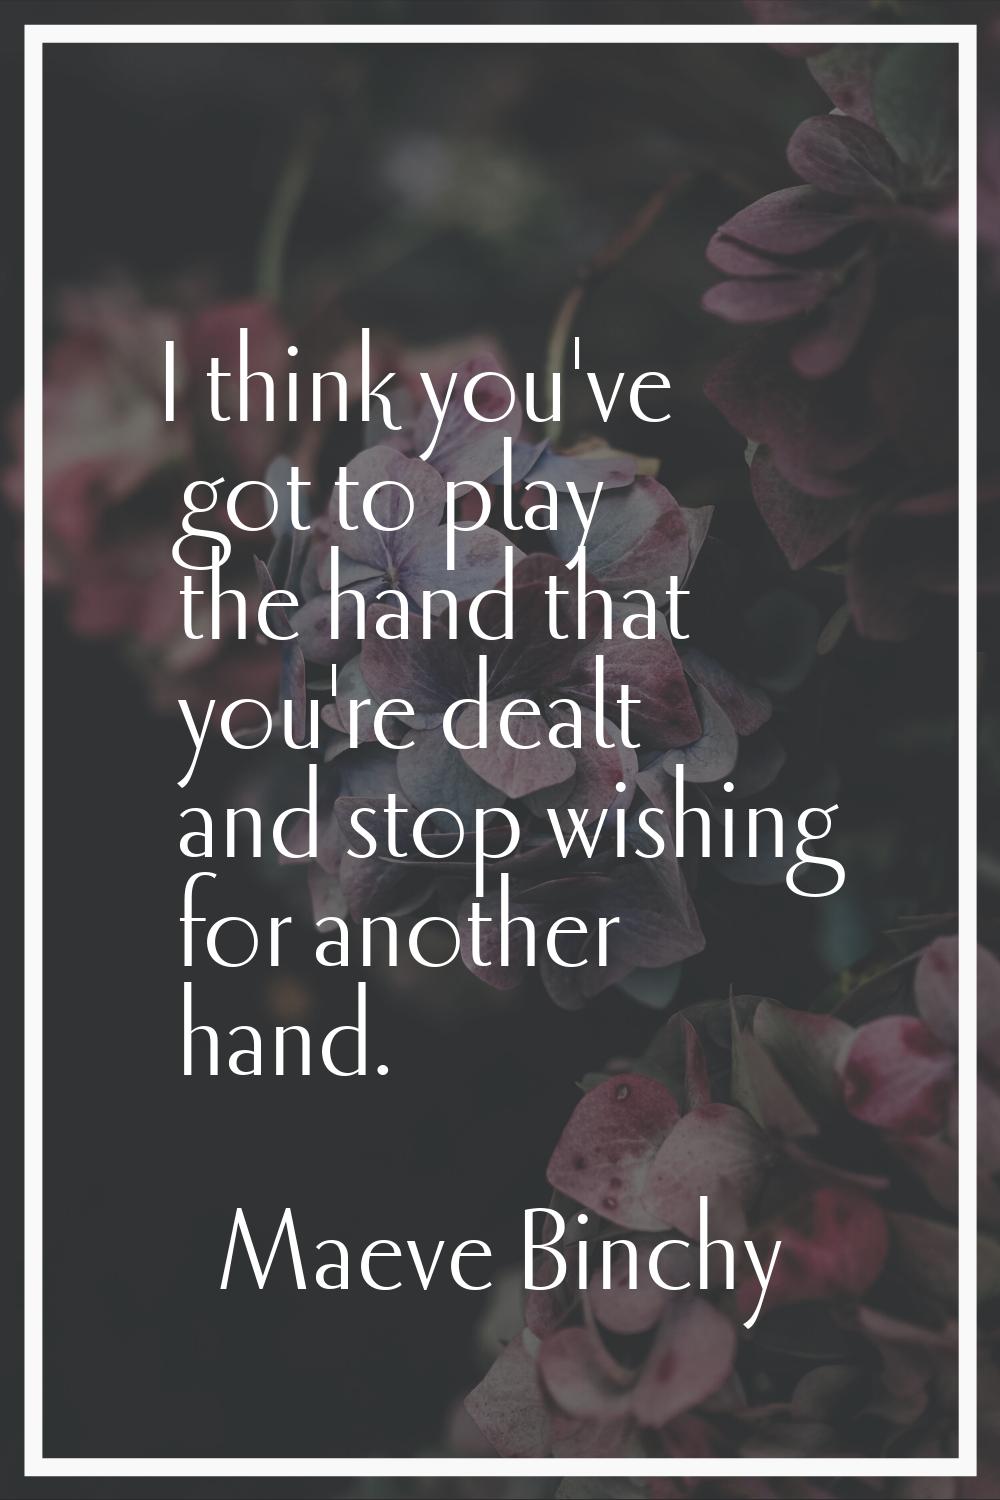 I think you've got to play the hand that you're dealt and stop wishing for another hand.